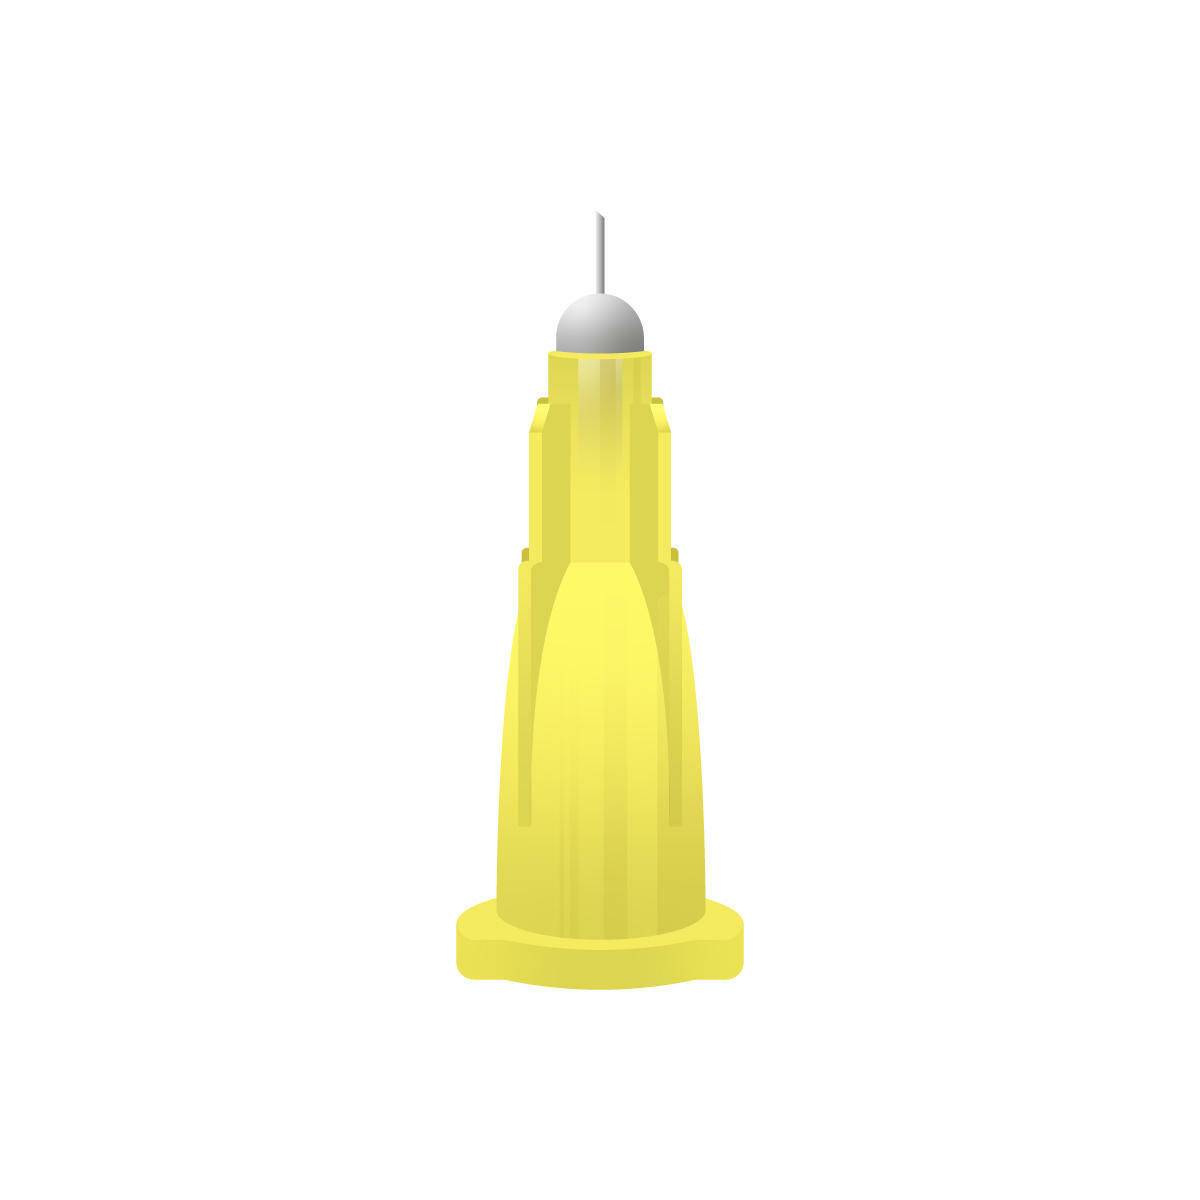 30g Yellow 2.5mm Meso-relle Micro Needle for Microtherapy - UKMEDI